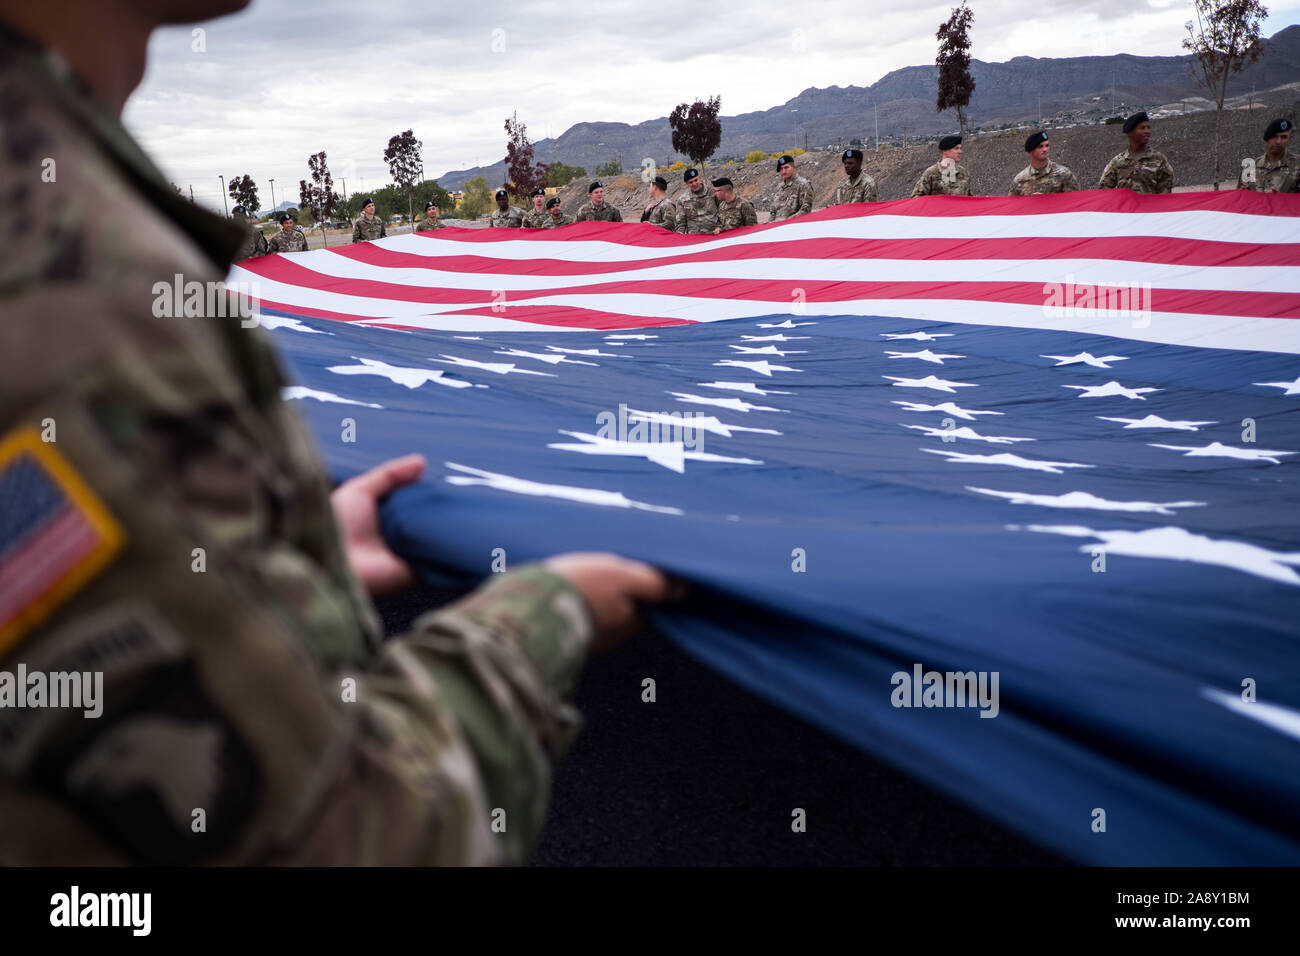 El Paso, Texas, USA. 11th Nov, 2019. Soldiers of 1st Battalion, 77th Armor Regiment, 3rd Armored Brigade Combat Team ''Bulldog'', 1st Armored Division, carry an American flag during a Veteran's Day celebration in El Paso, Texas. Credit: Joel Angel Juarez/ZUMA Wire/Alamy Live News Stock Photo